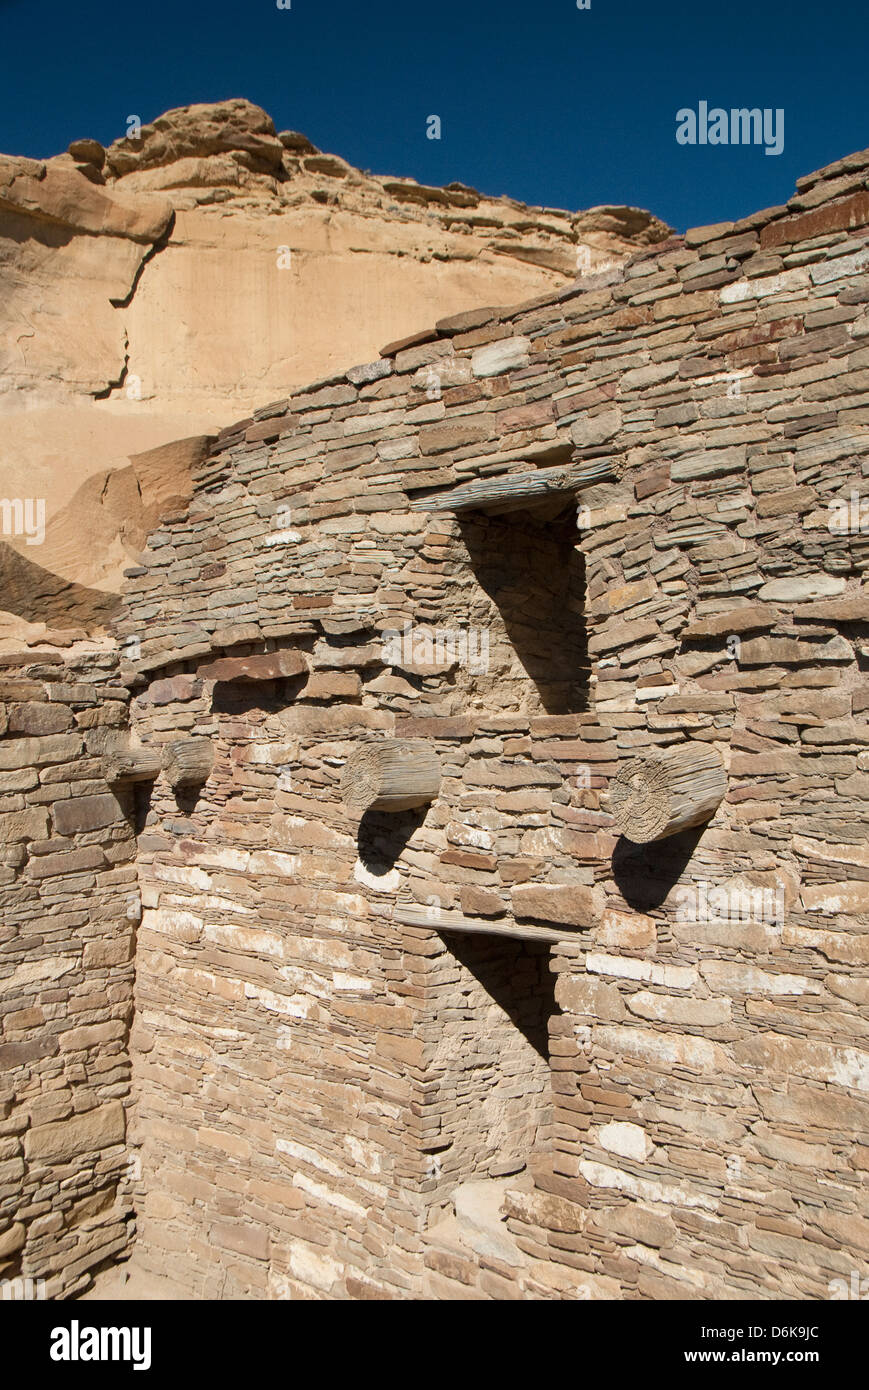 Chaco Culture National Historical Park, UNESCO World Heritage Site, New Mexico, United States of America, North America Stock Photo